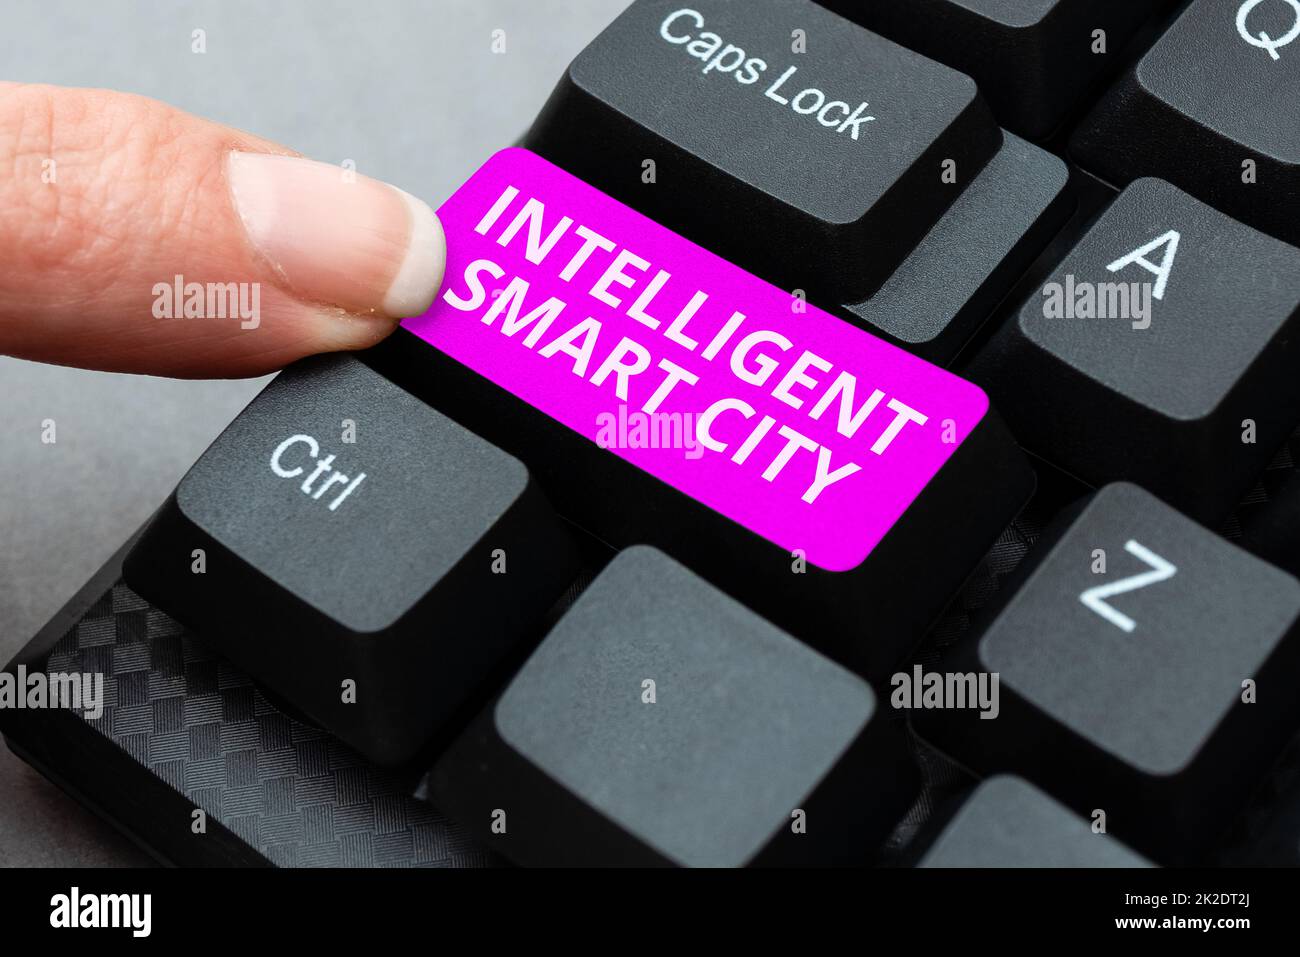 Conceptual display Intelligent Smart City. Internet Concept Urban intelligent building automation system business Typing Character Background Story, Creating New Social Media Account Stock Photo